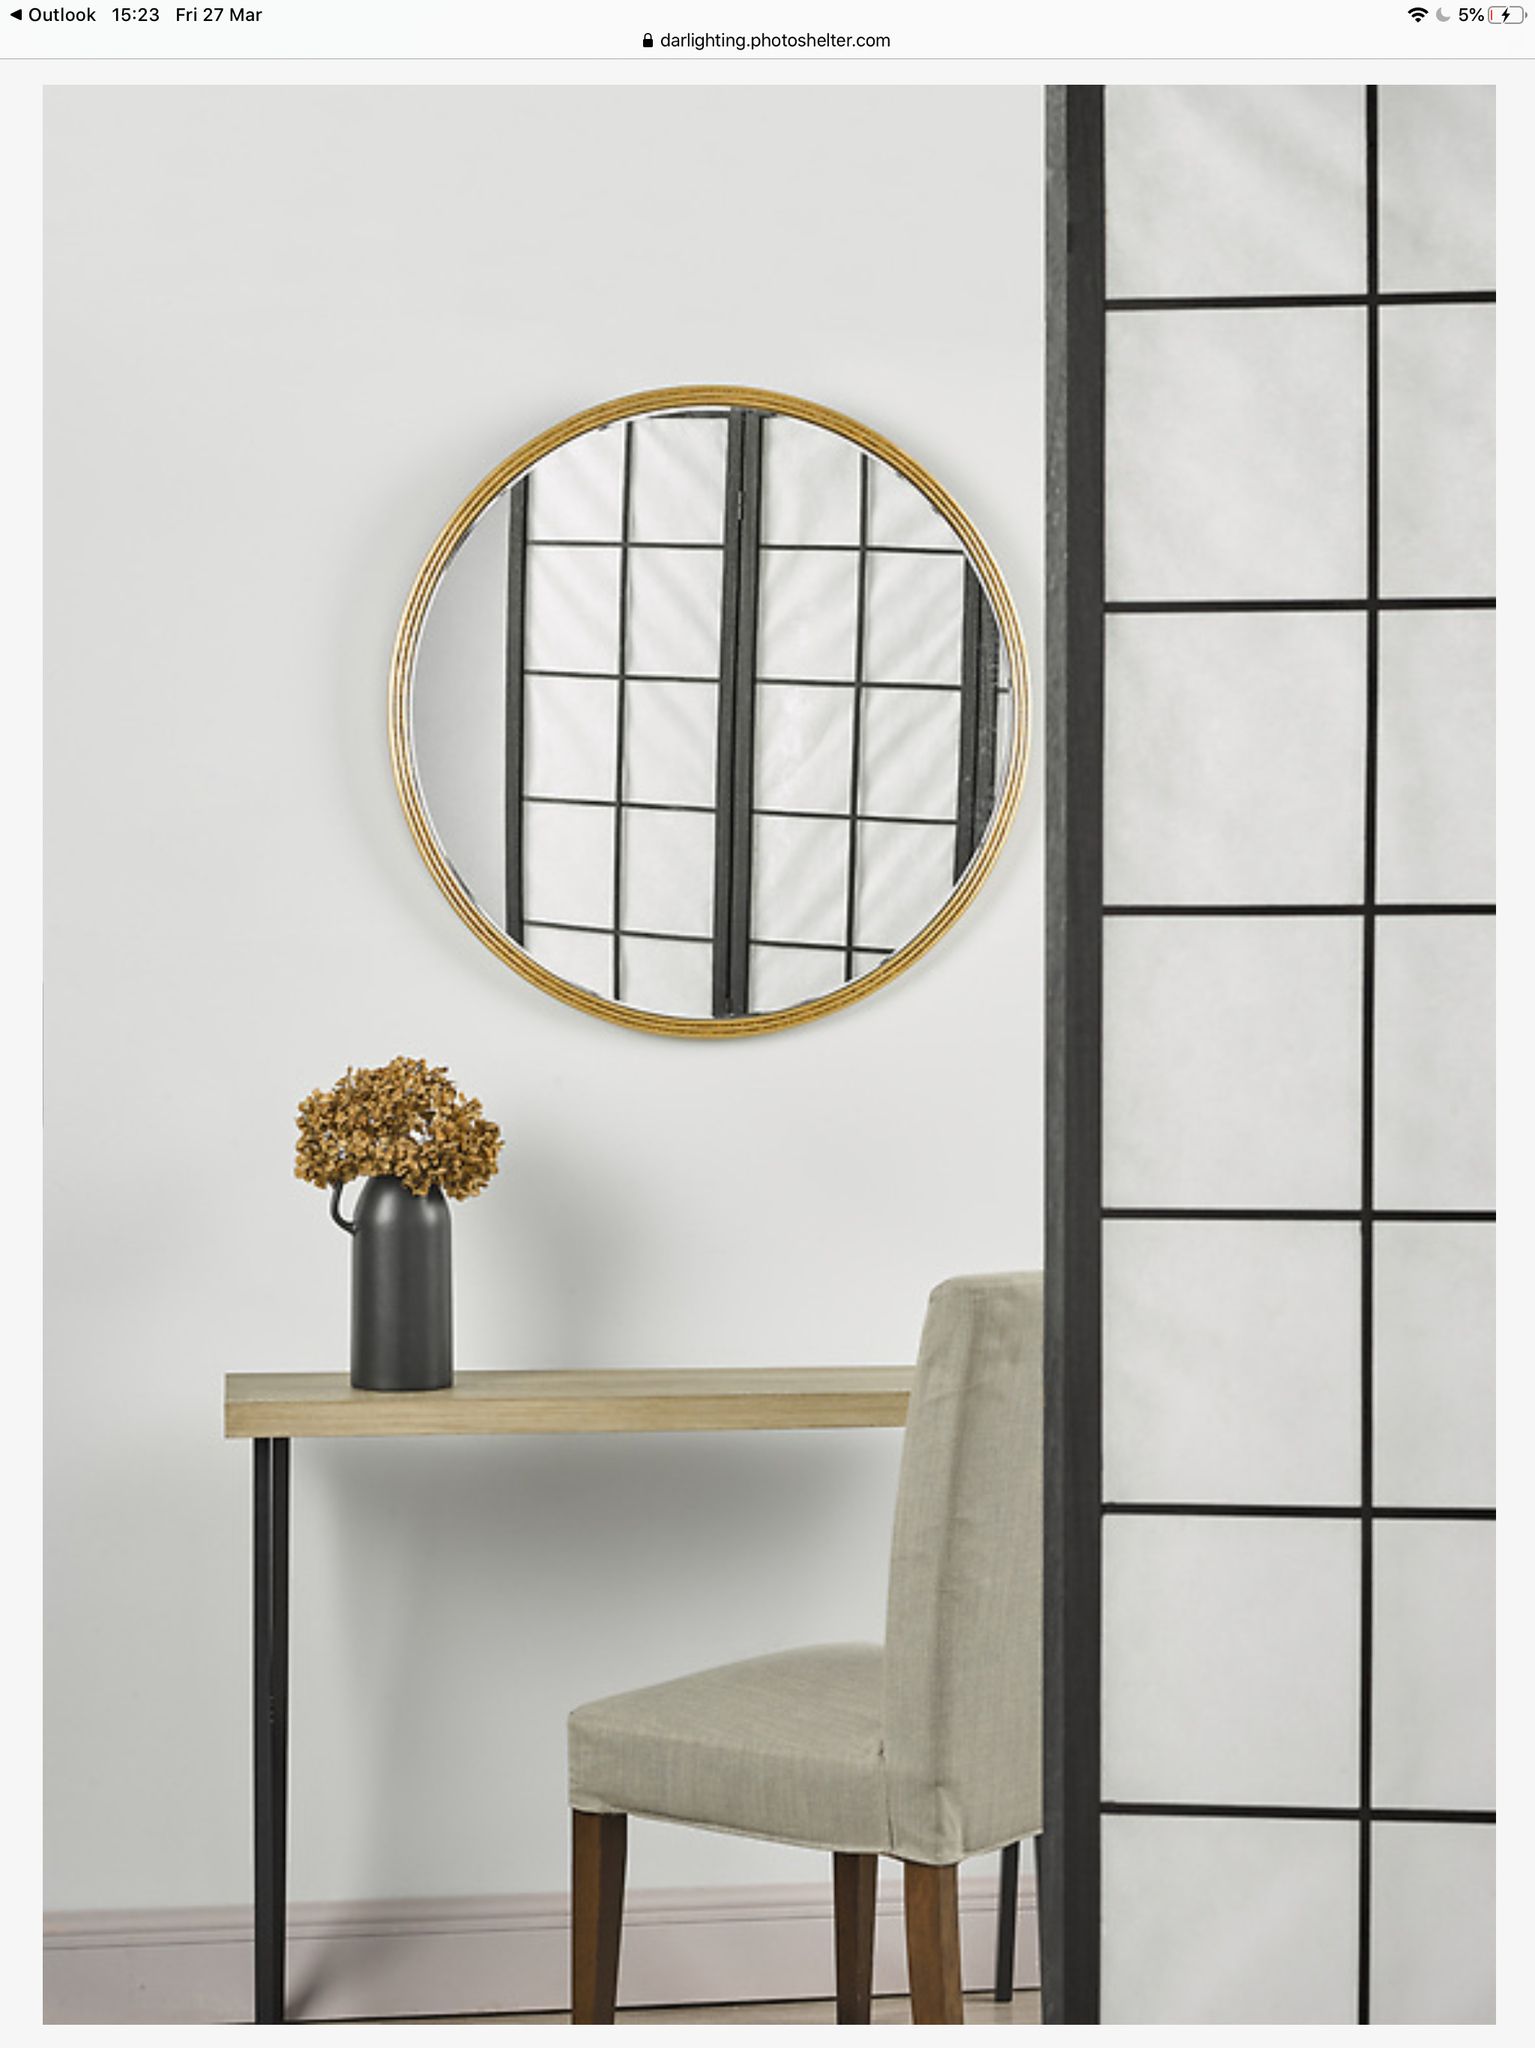 Briton – Beaded Edge Round Gold Mirror – Lightbox Intended For Gold Black Rounded Edge Wall Mirrors (View 13 of 15)